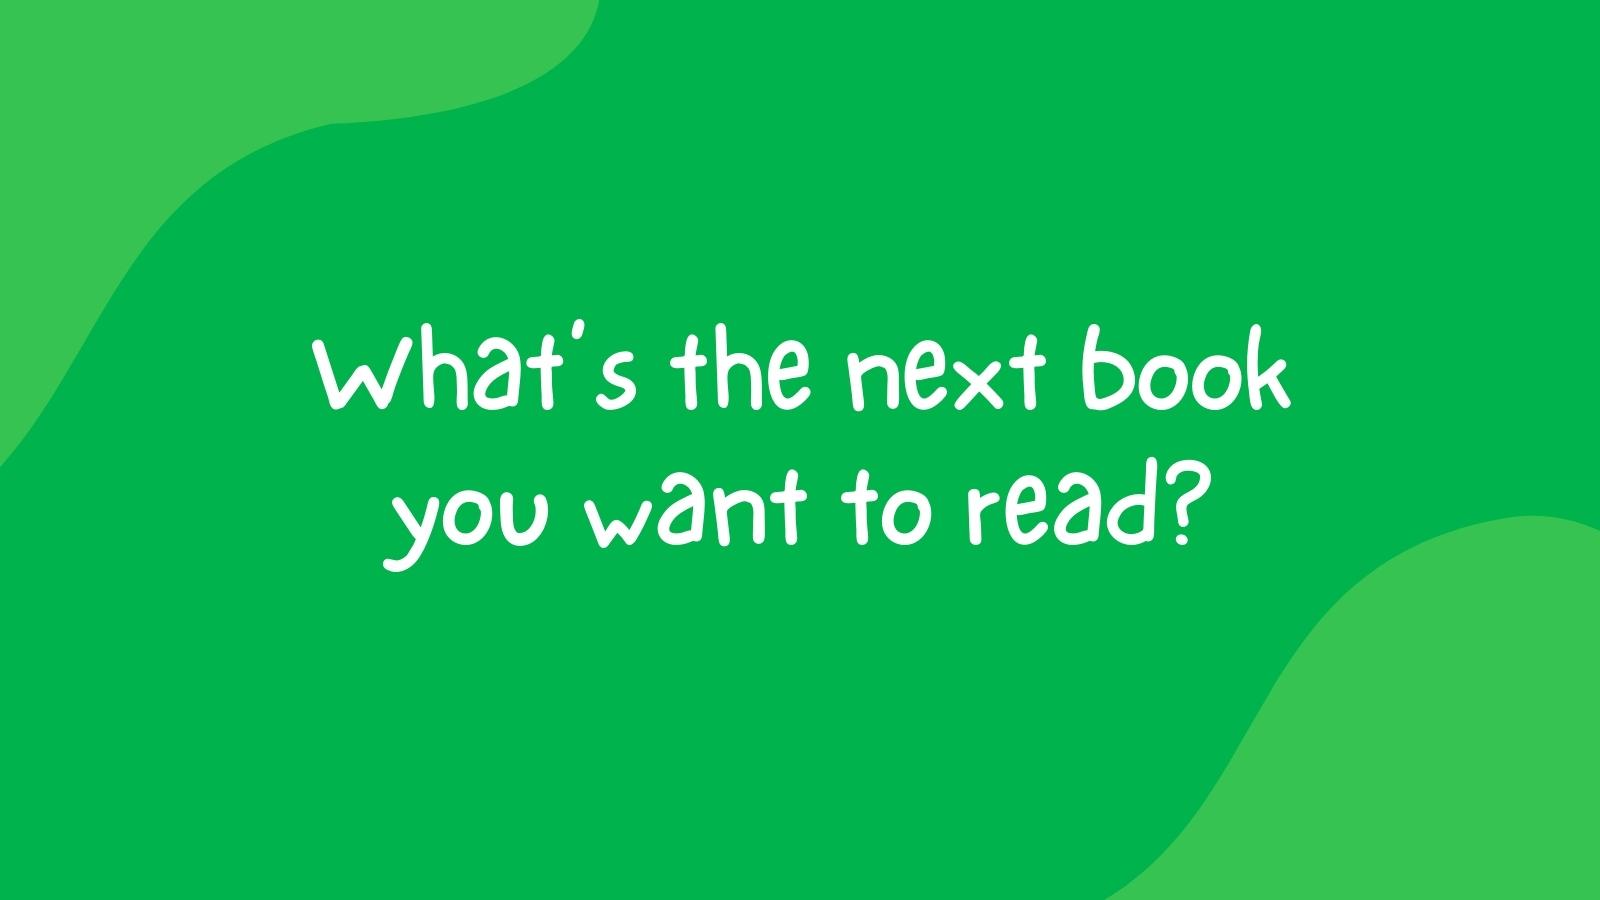 What's the next book you want to read?